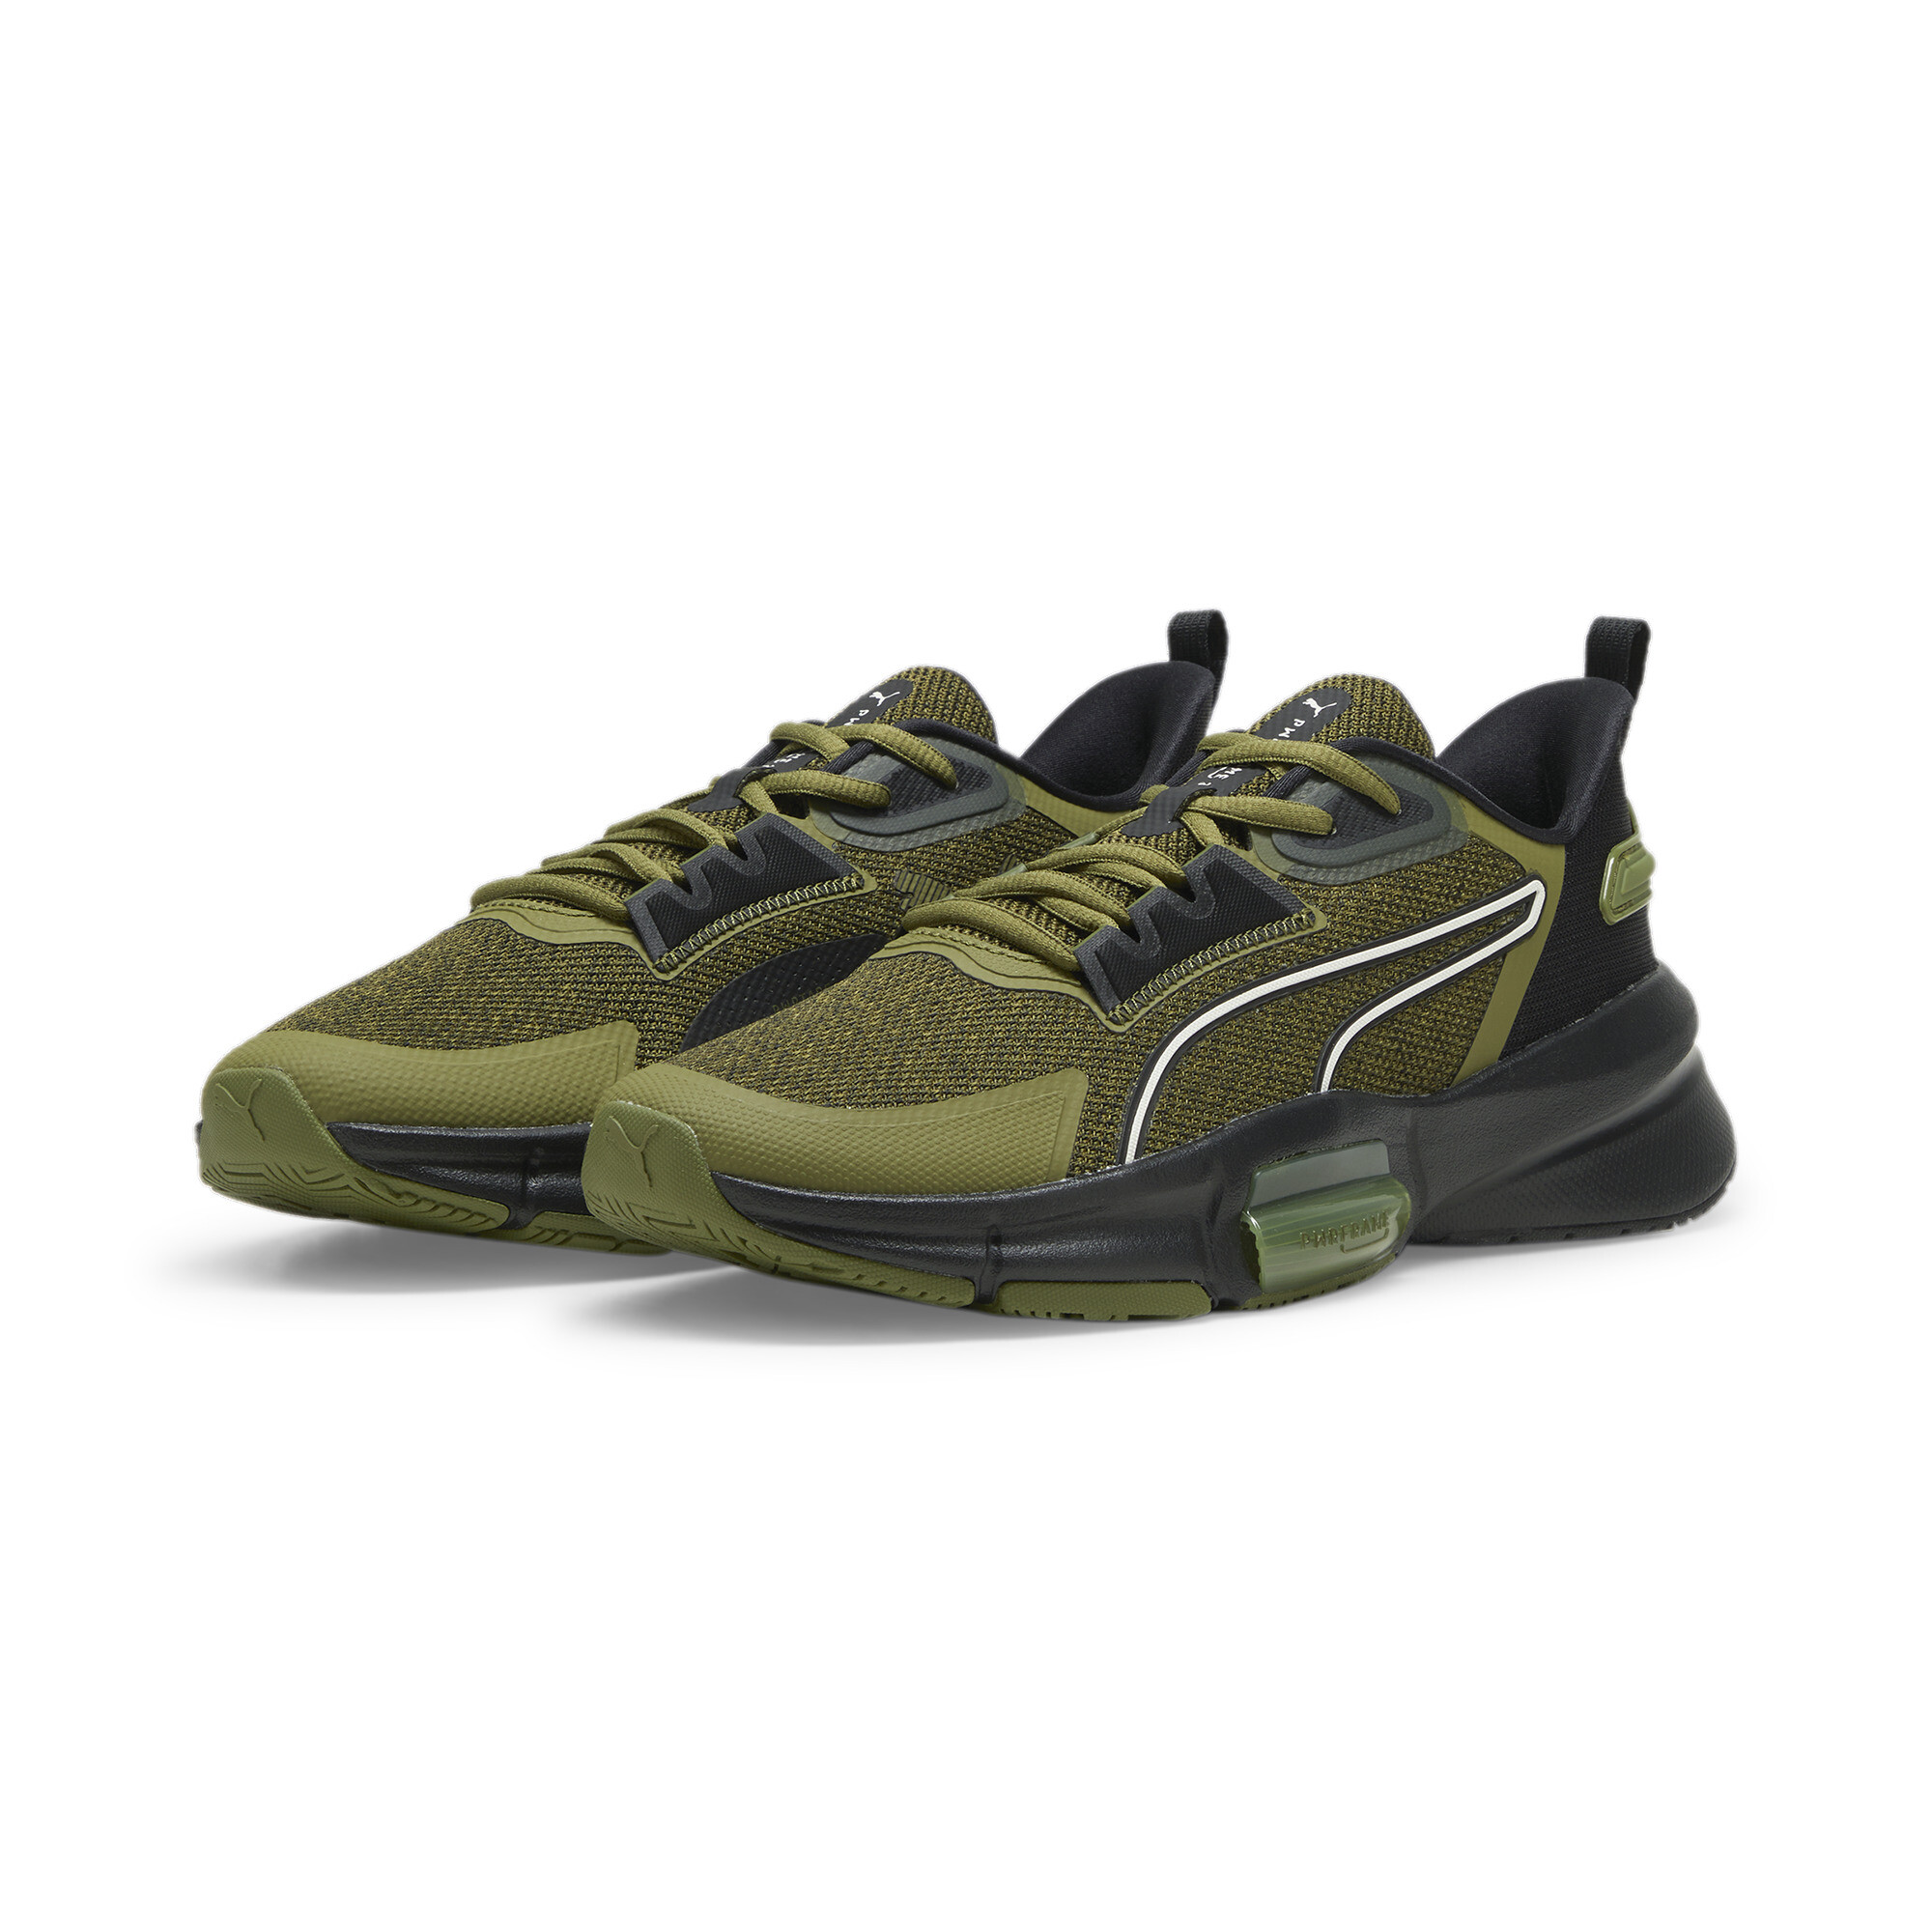 Men's PUMA PWRFrame TR 3 Neo Force Training Shoes In 40 - Green, Size EU 42.5